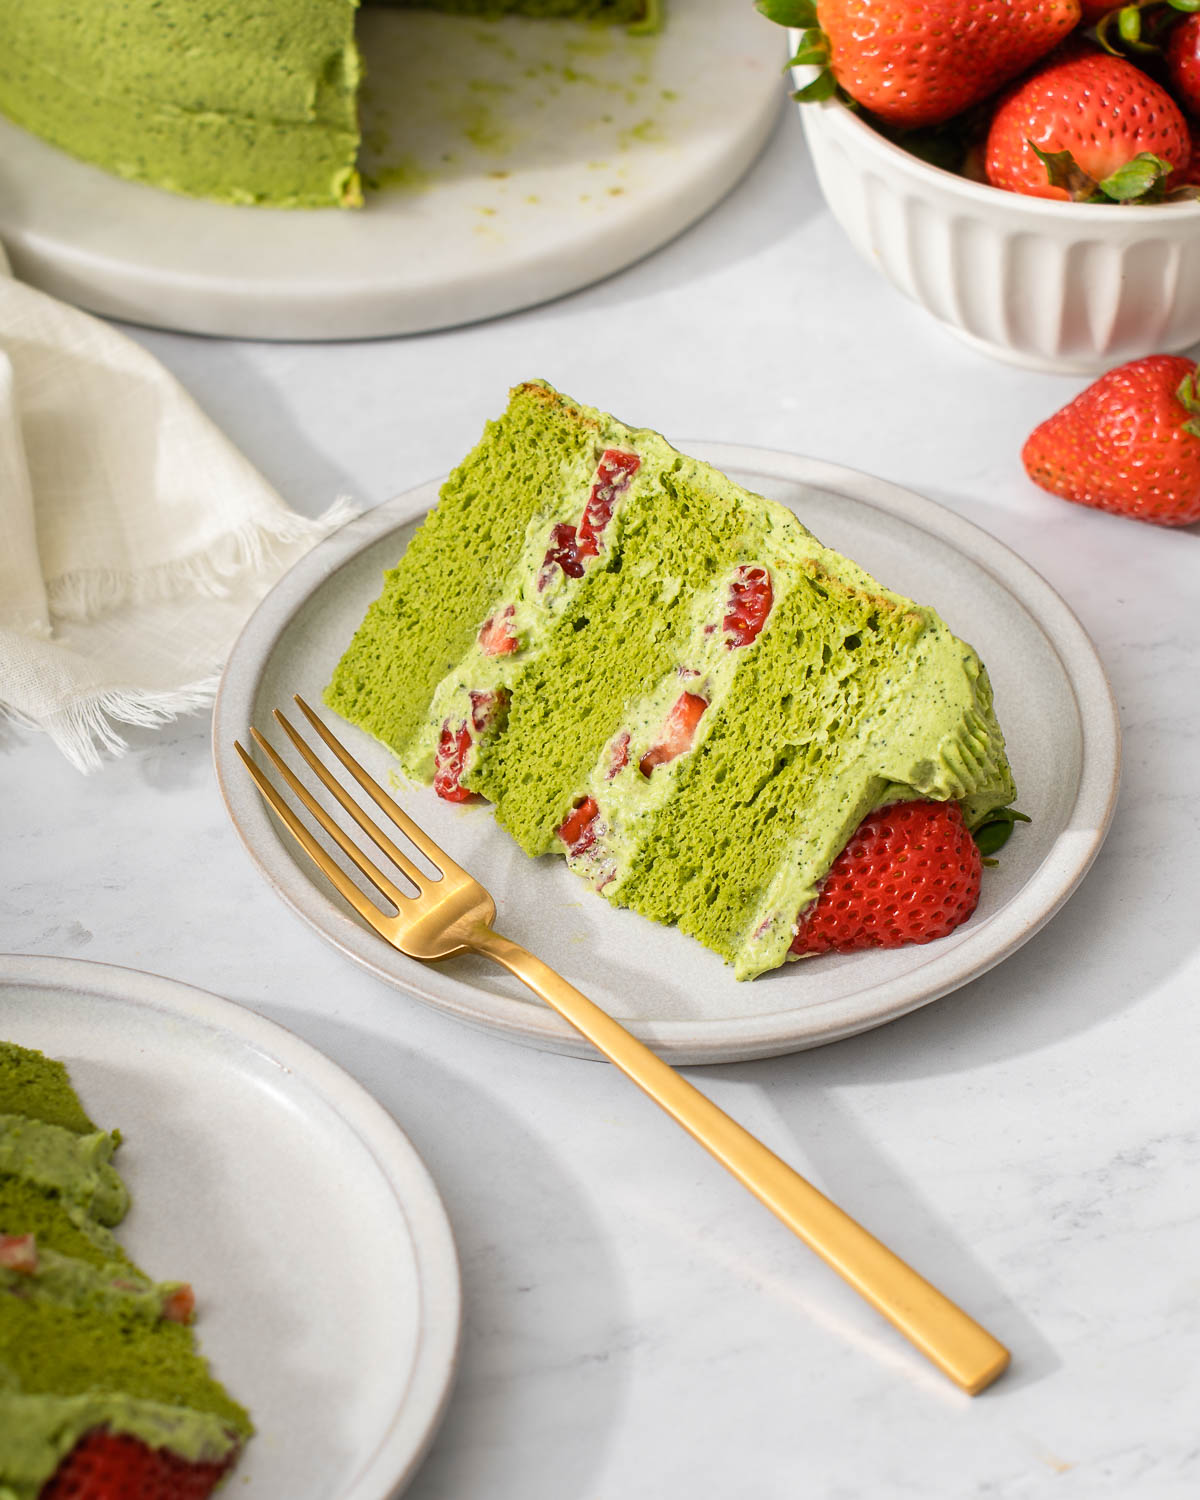 A slice of matcha cake with strawberries resting on a dessert plate.